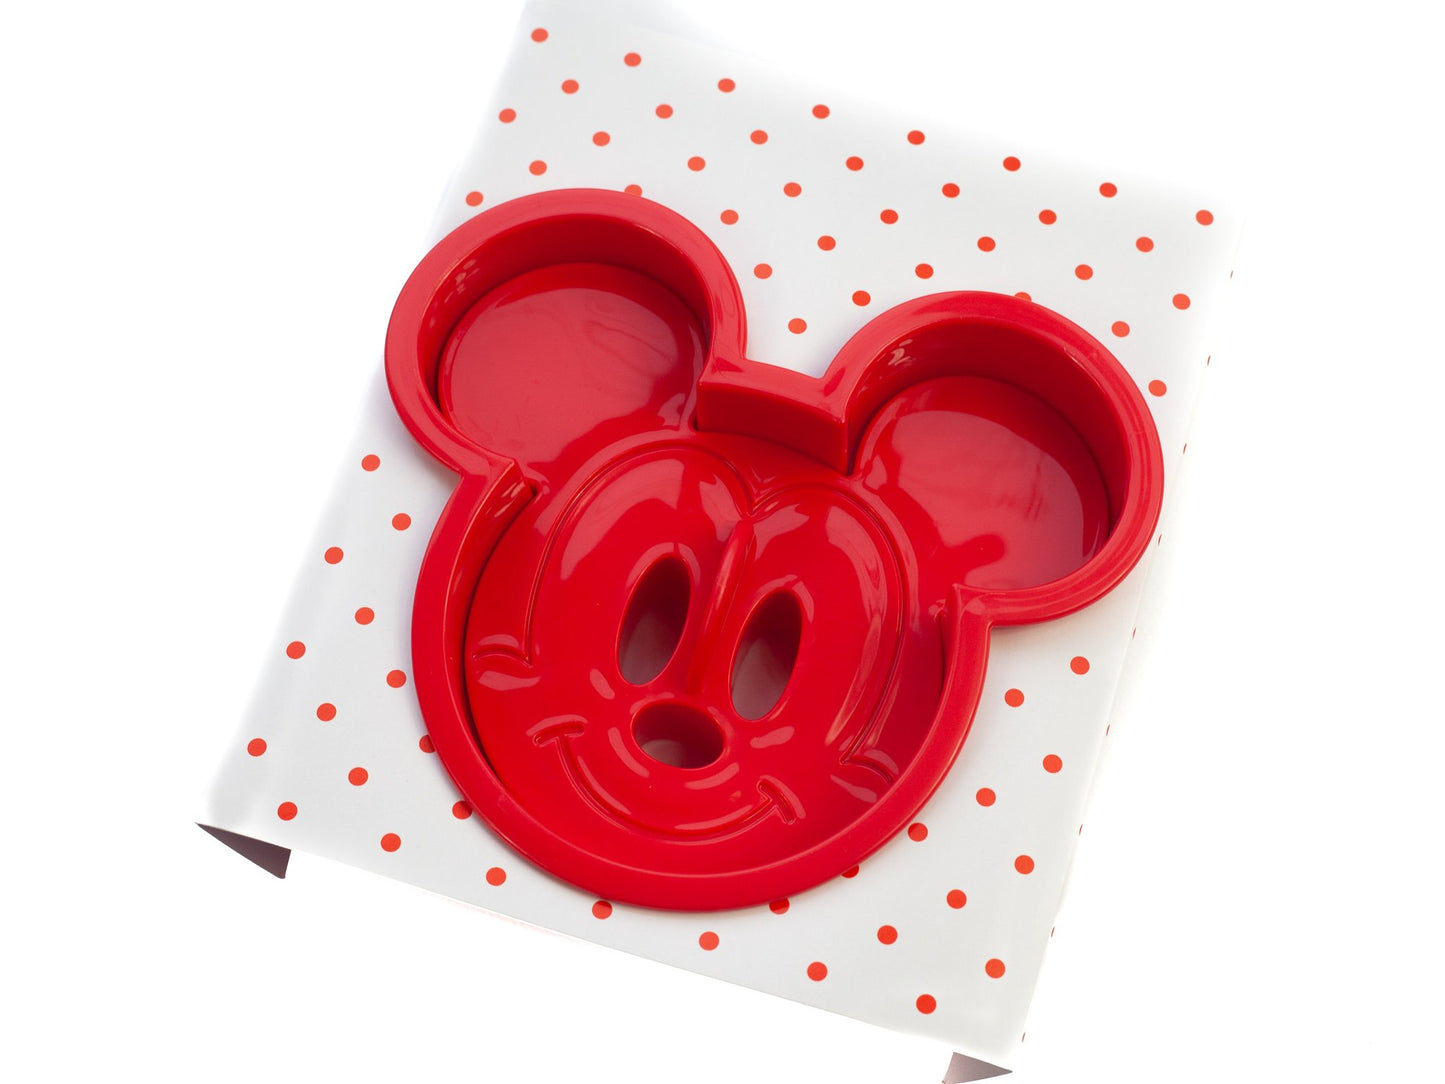 Bread Cutter | Micky Mouse